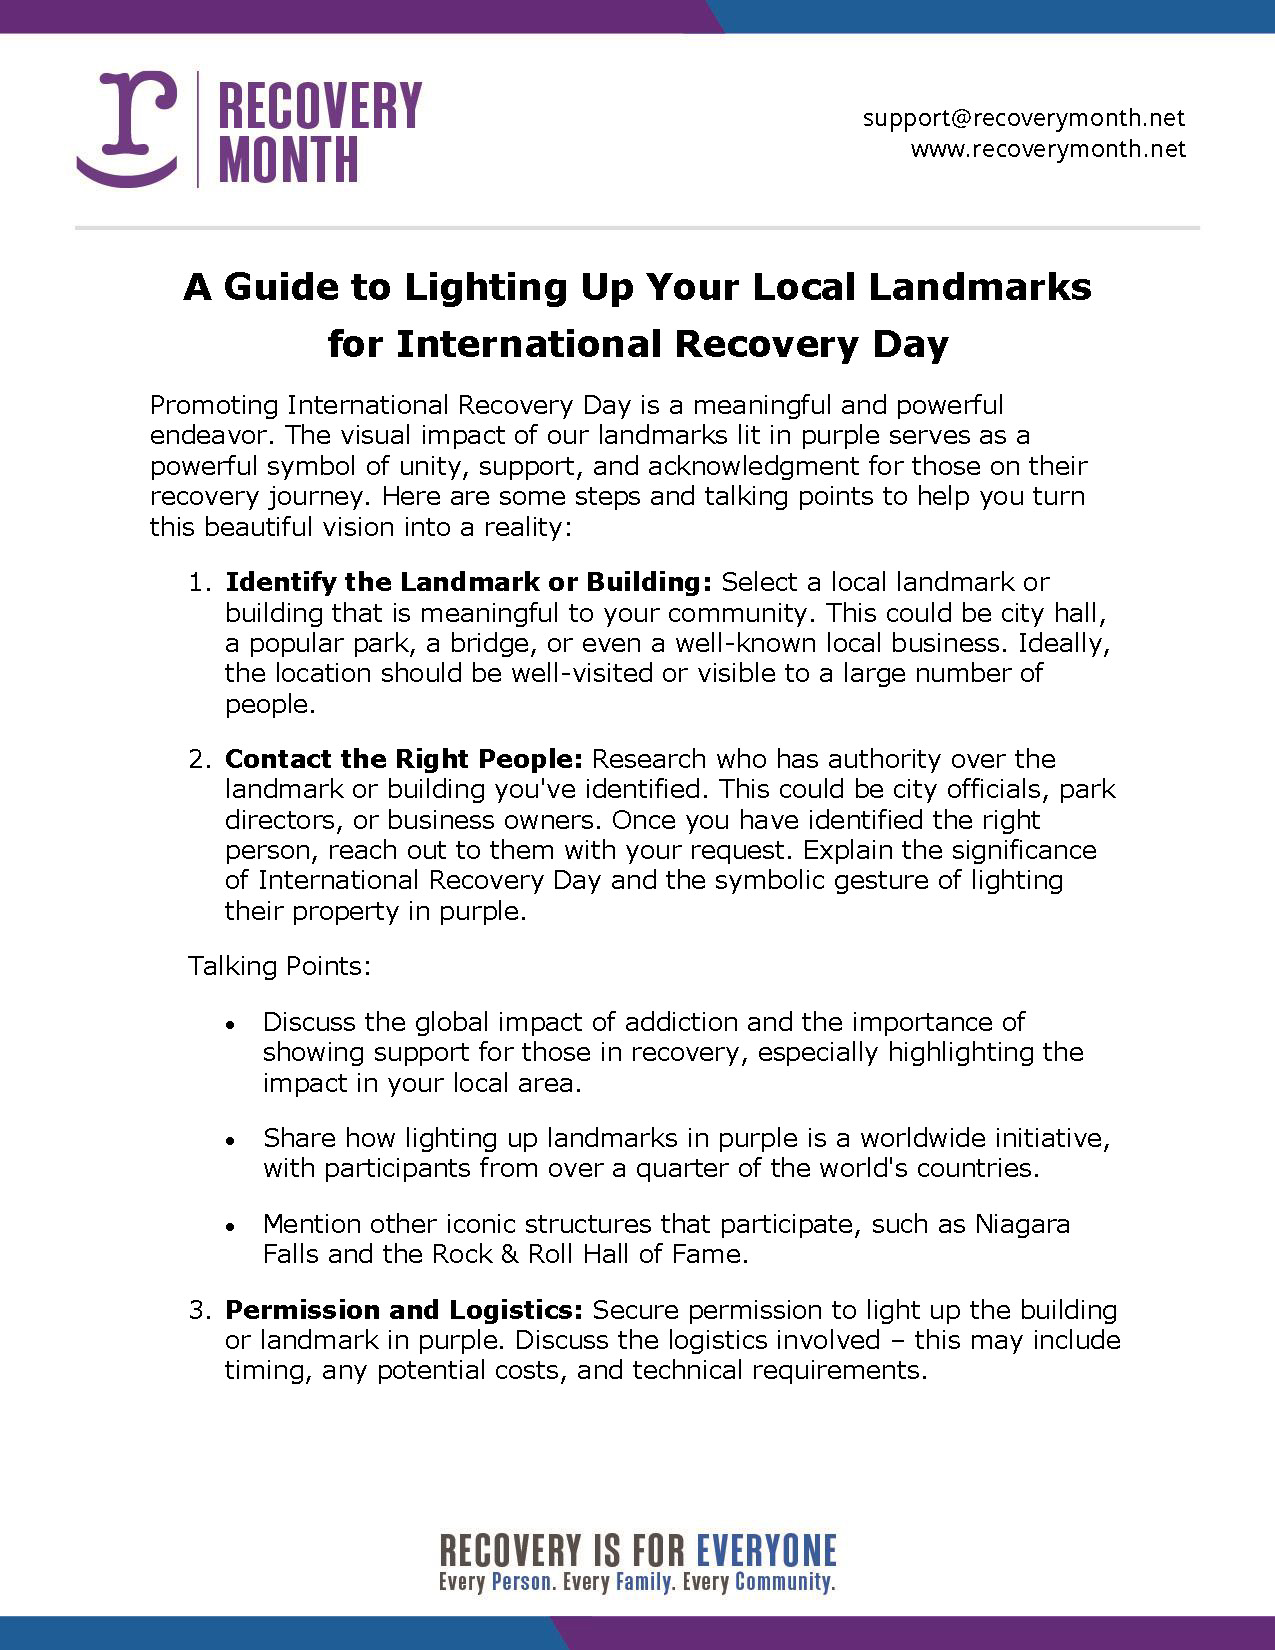 071223_A Guide to Lighting Up Your Local Landmarks_IRD_Page_1